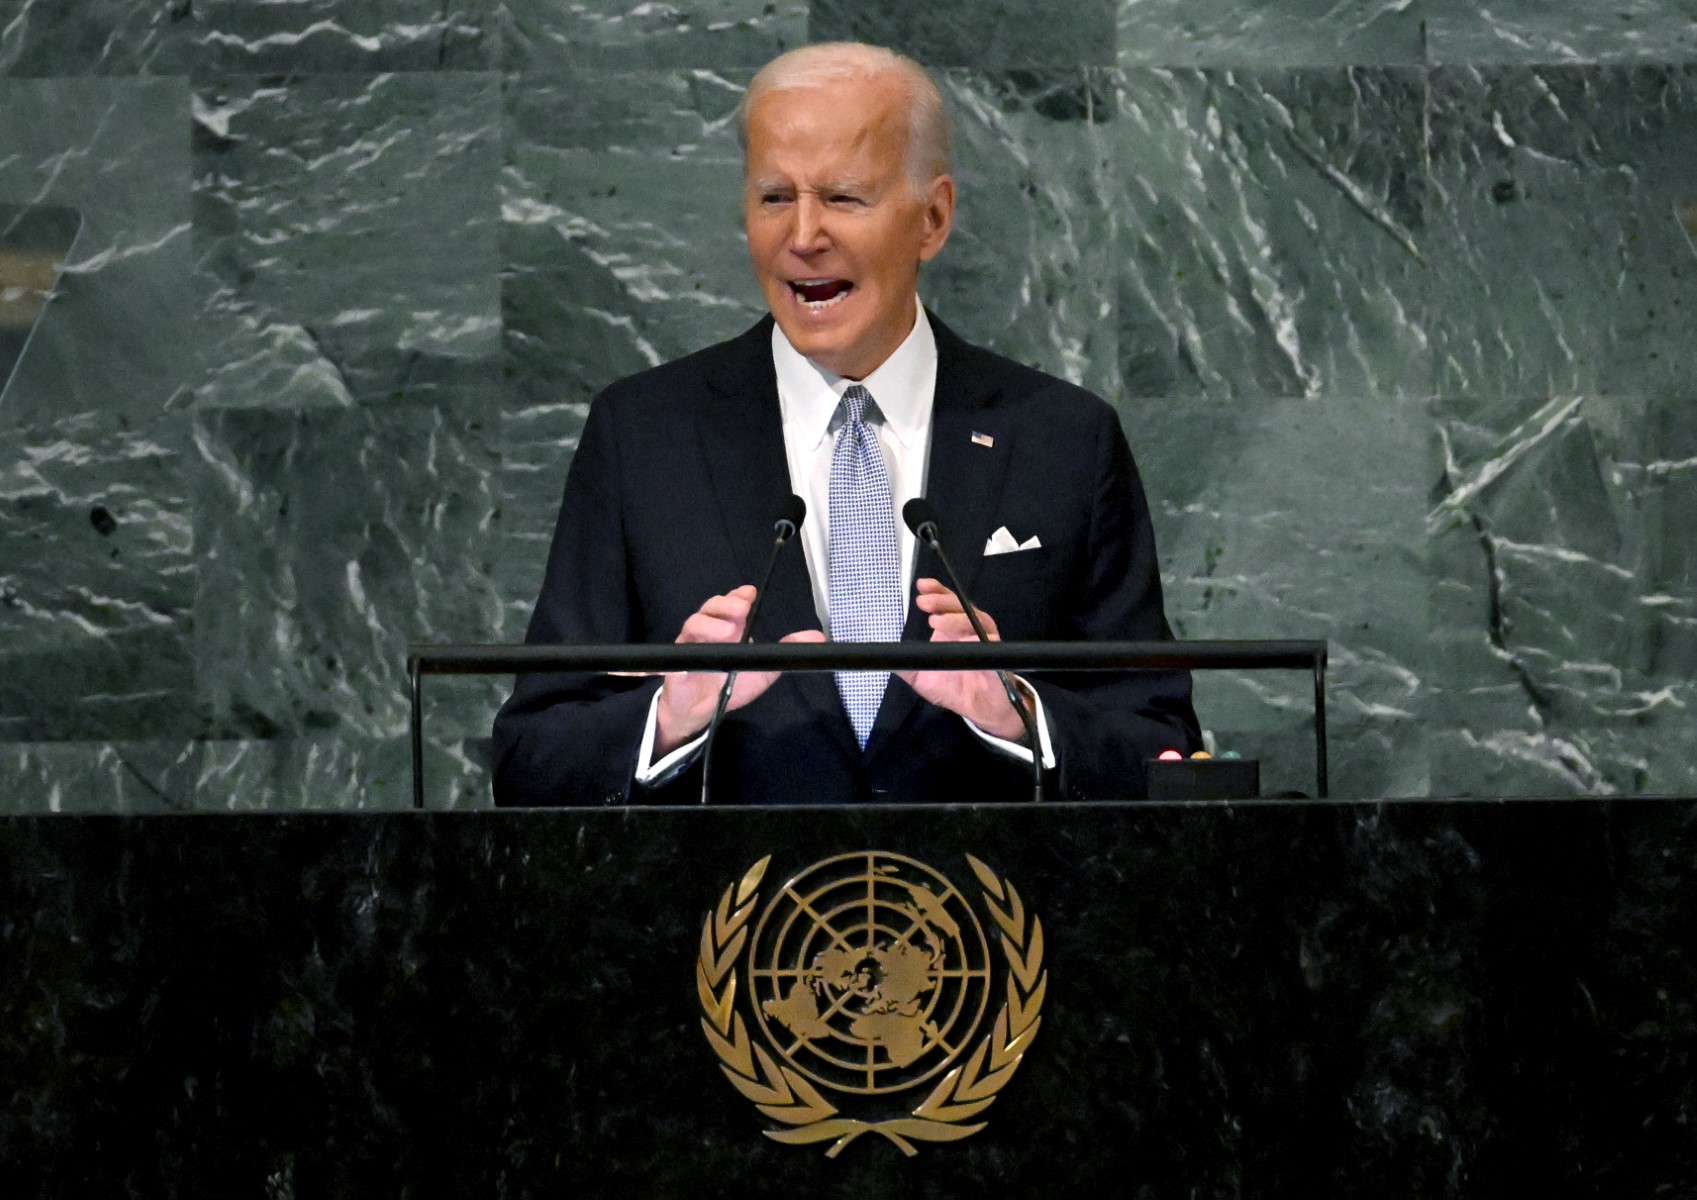 President Biden enters upcoming election year grappling with significant challenge